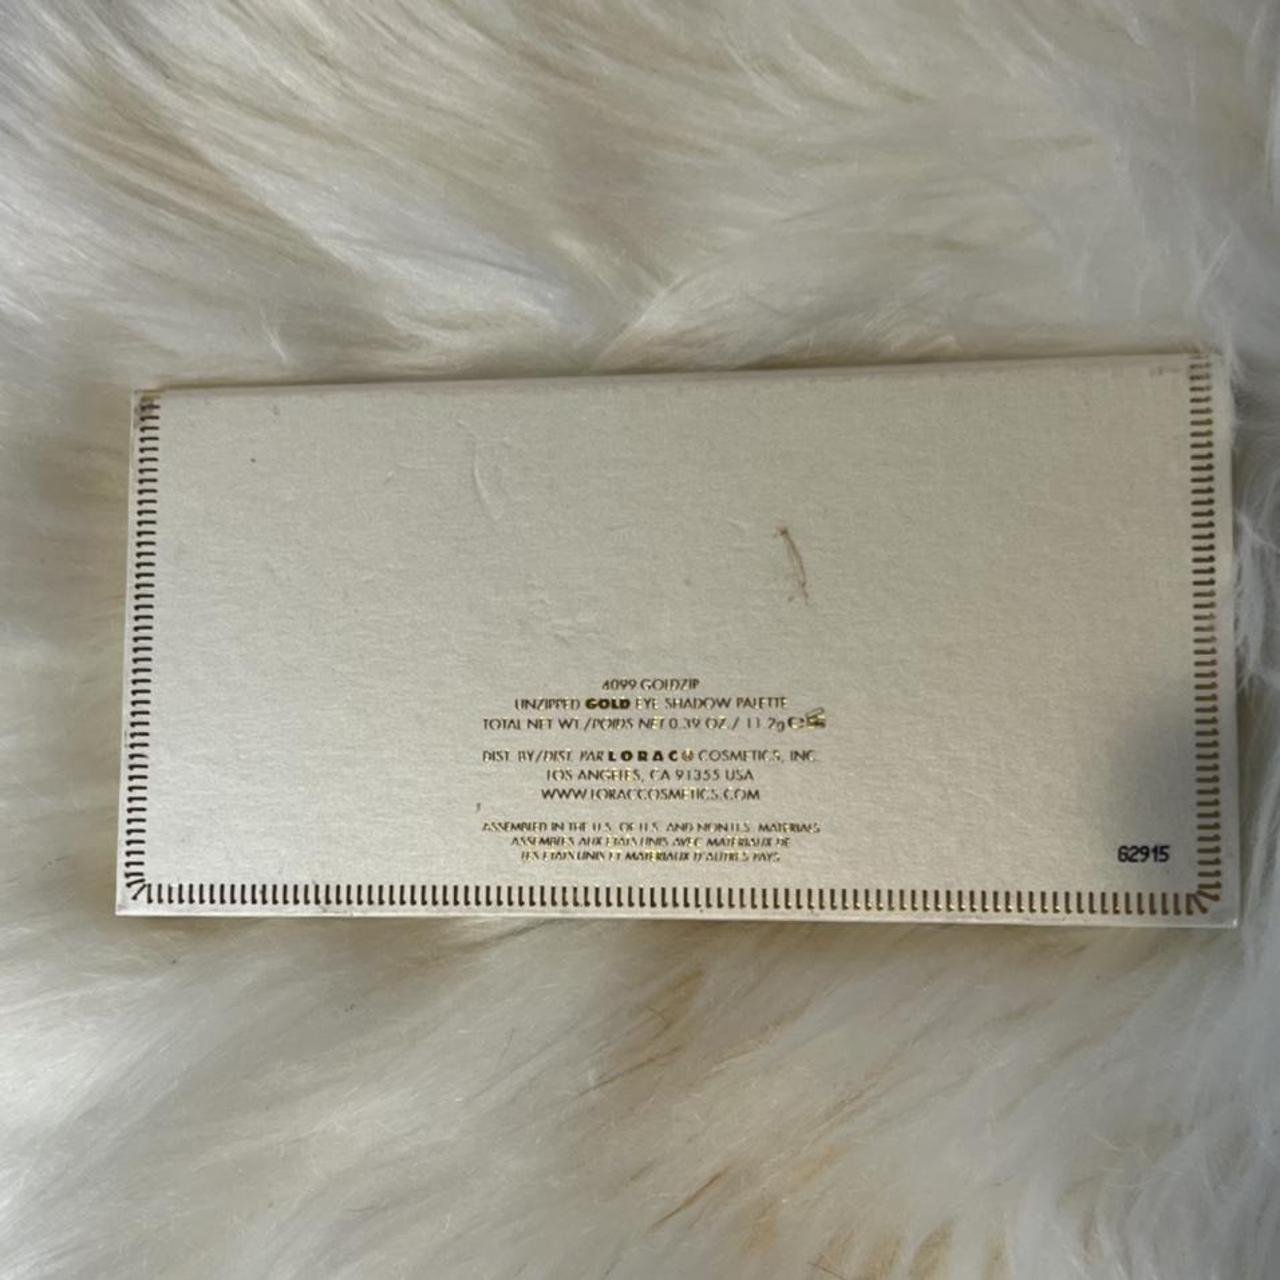 Product Image 3 - Lorac Unzipped Gold eyeshadow palette.
(There’s